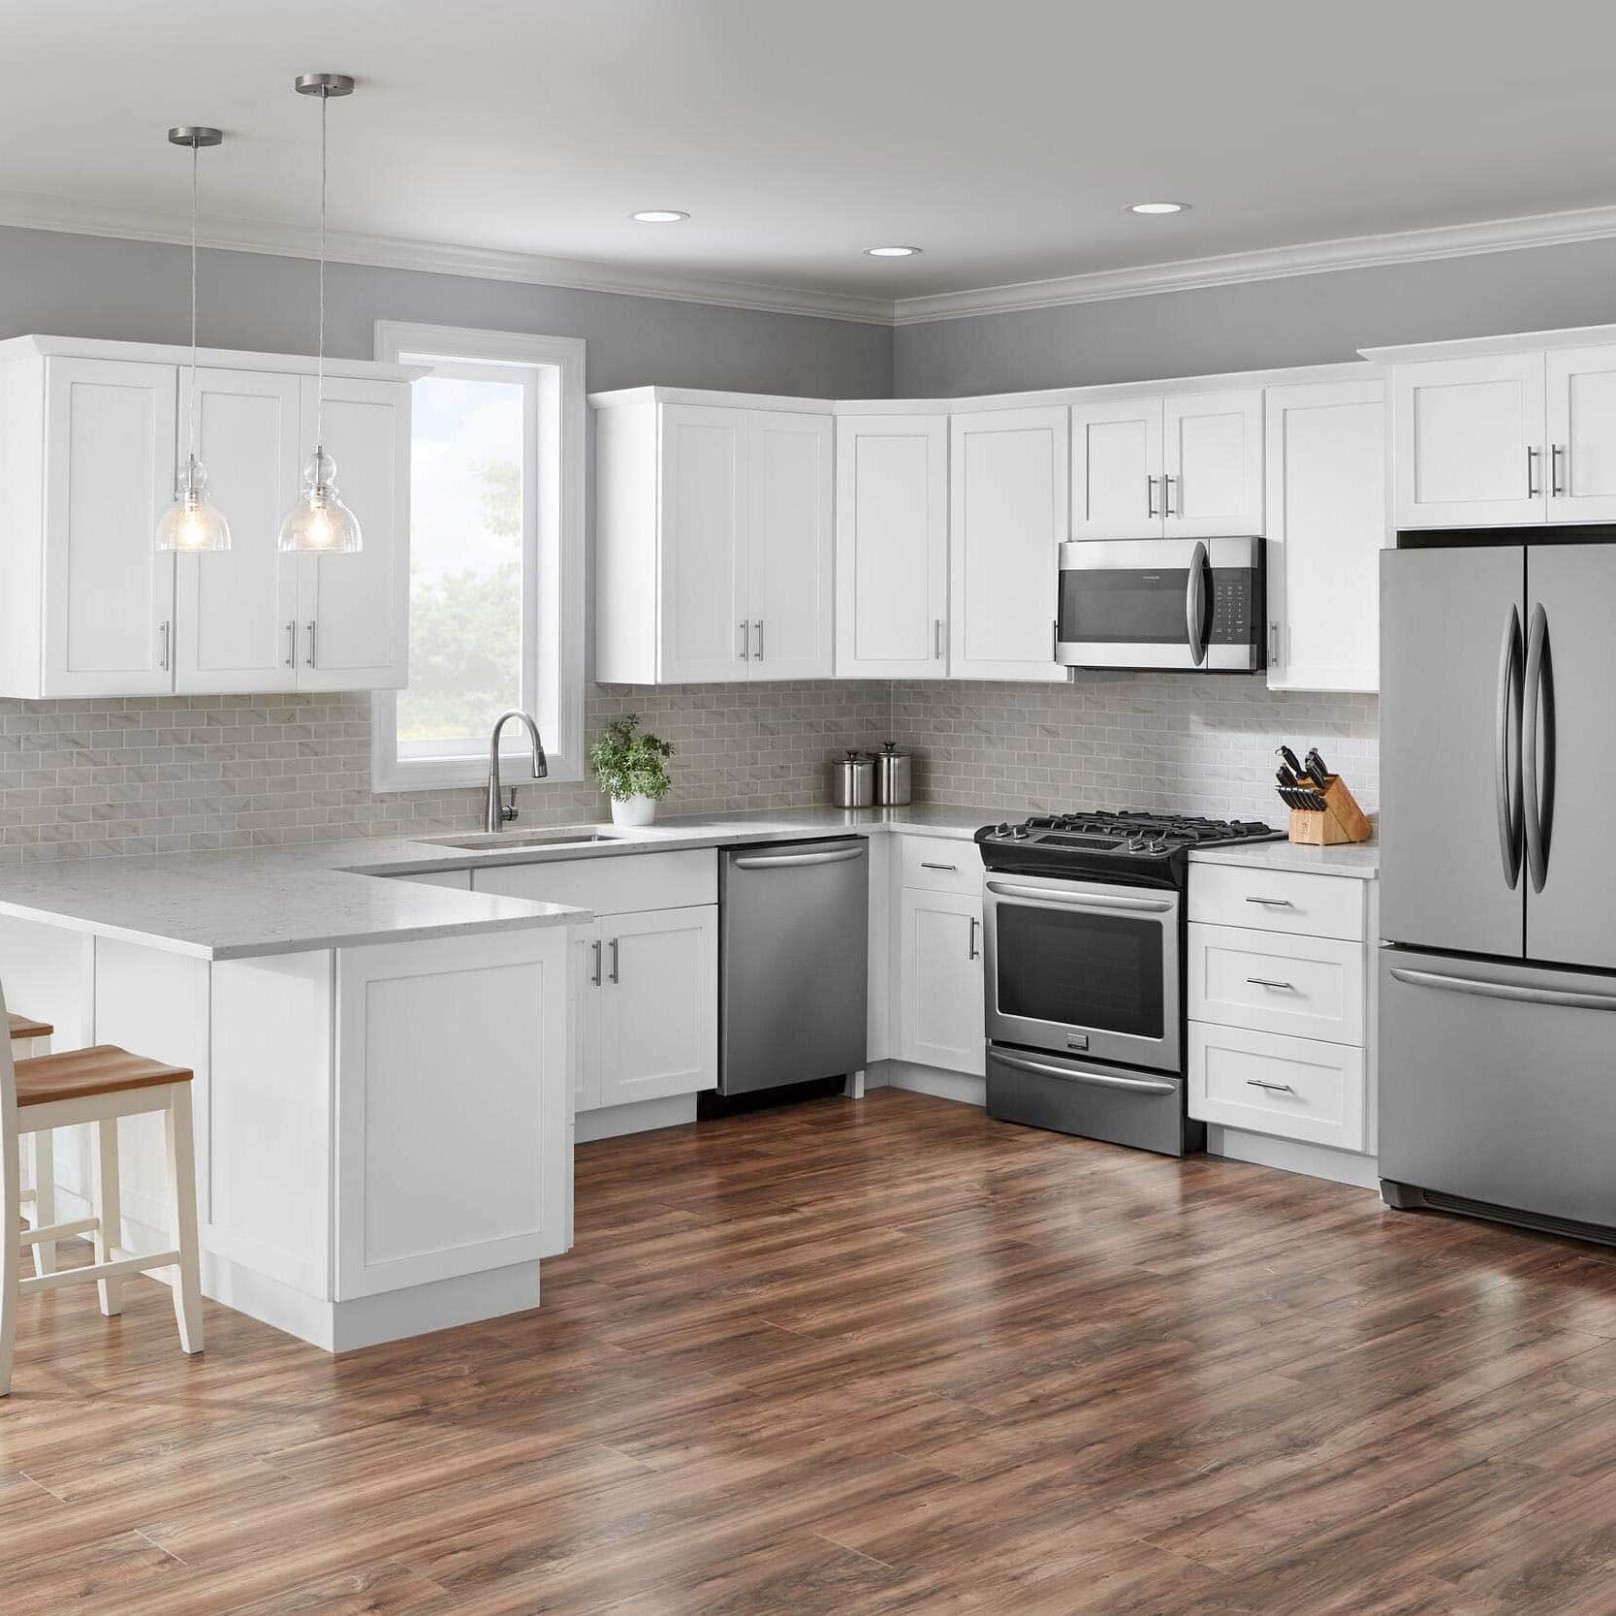 Ready to Assemble Kitchen Cabinets - In Stock Kitchen Cabinets  - in stock kitchen cabinets chicago